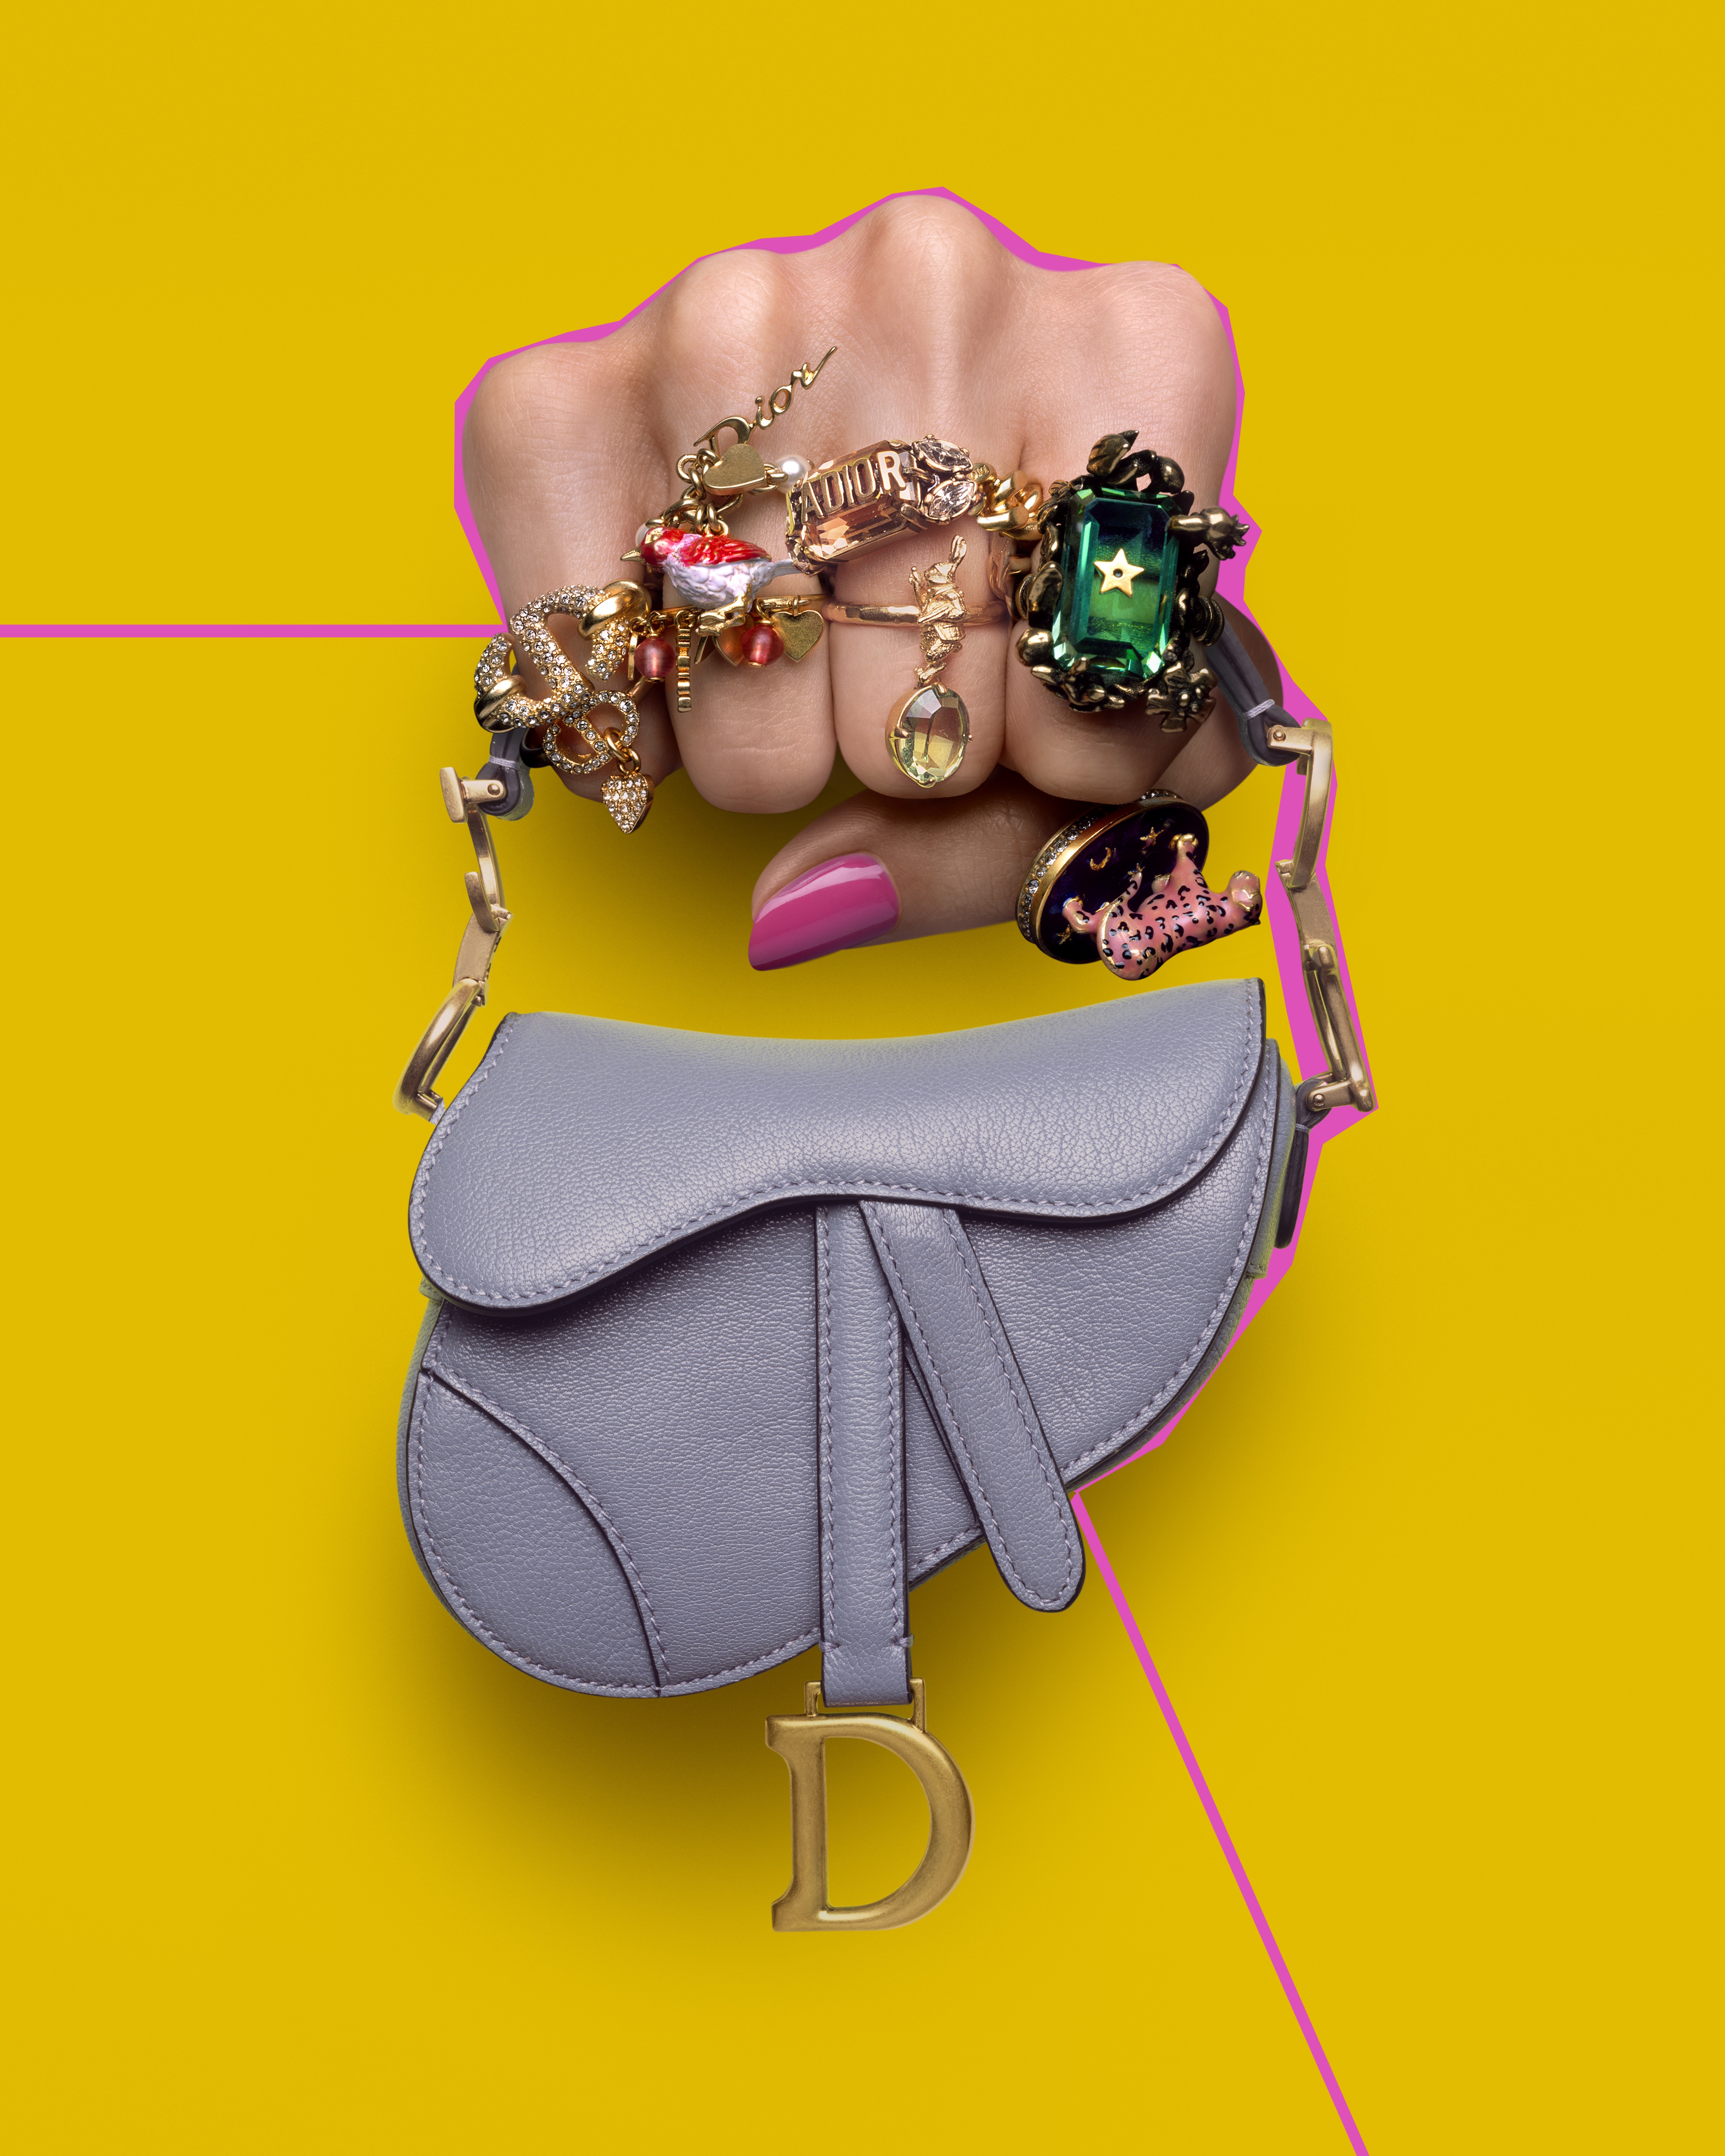 A hand wearing multiple rings clutching a miniature Dior saddle bag